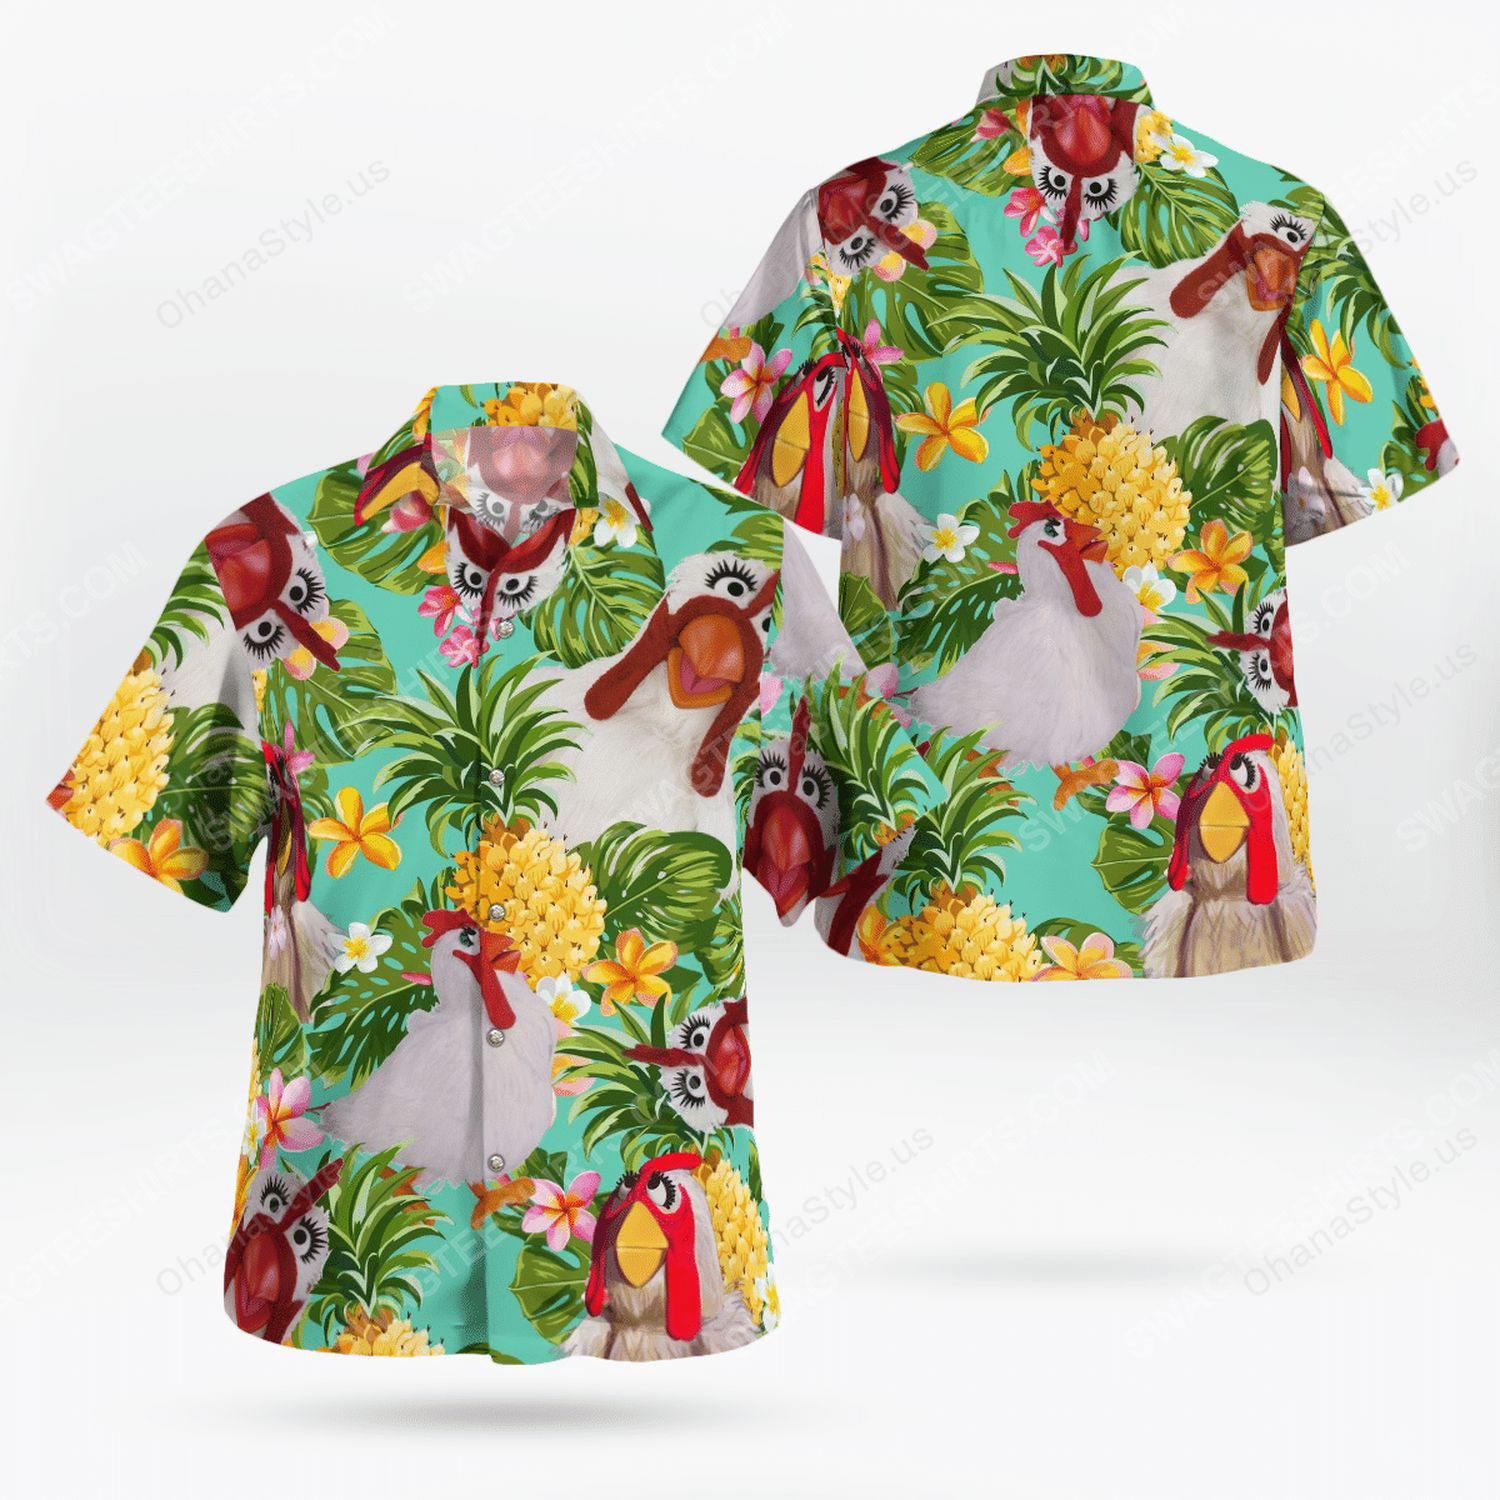 [special edition] The muppet show camilla the chicken hawaiian shirt – maria